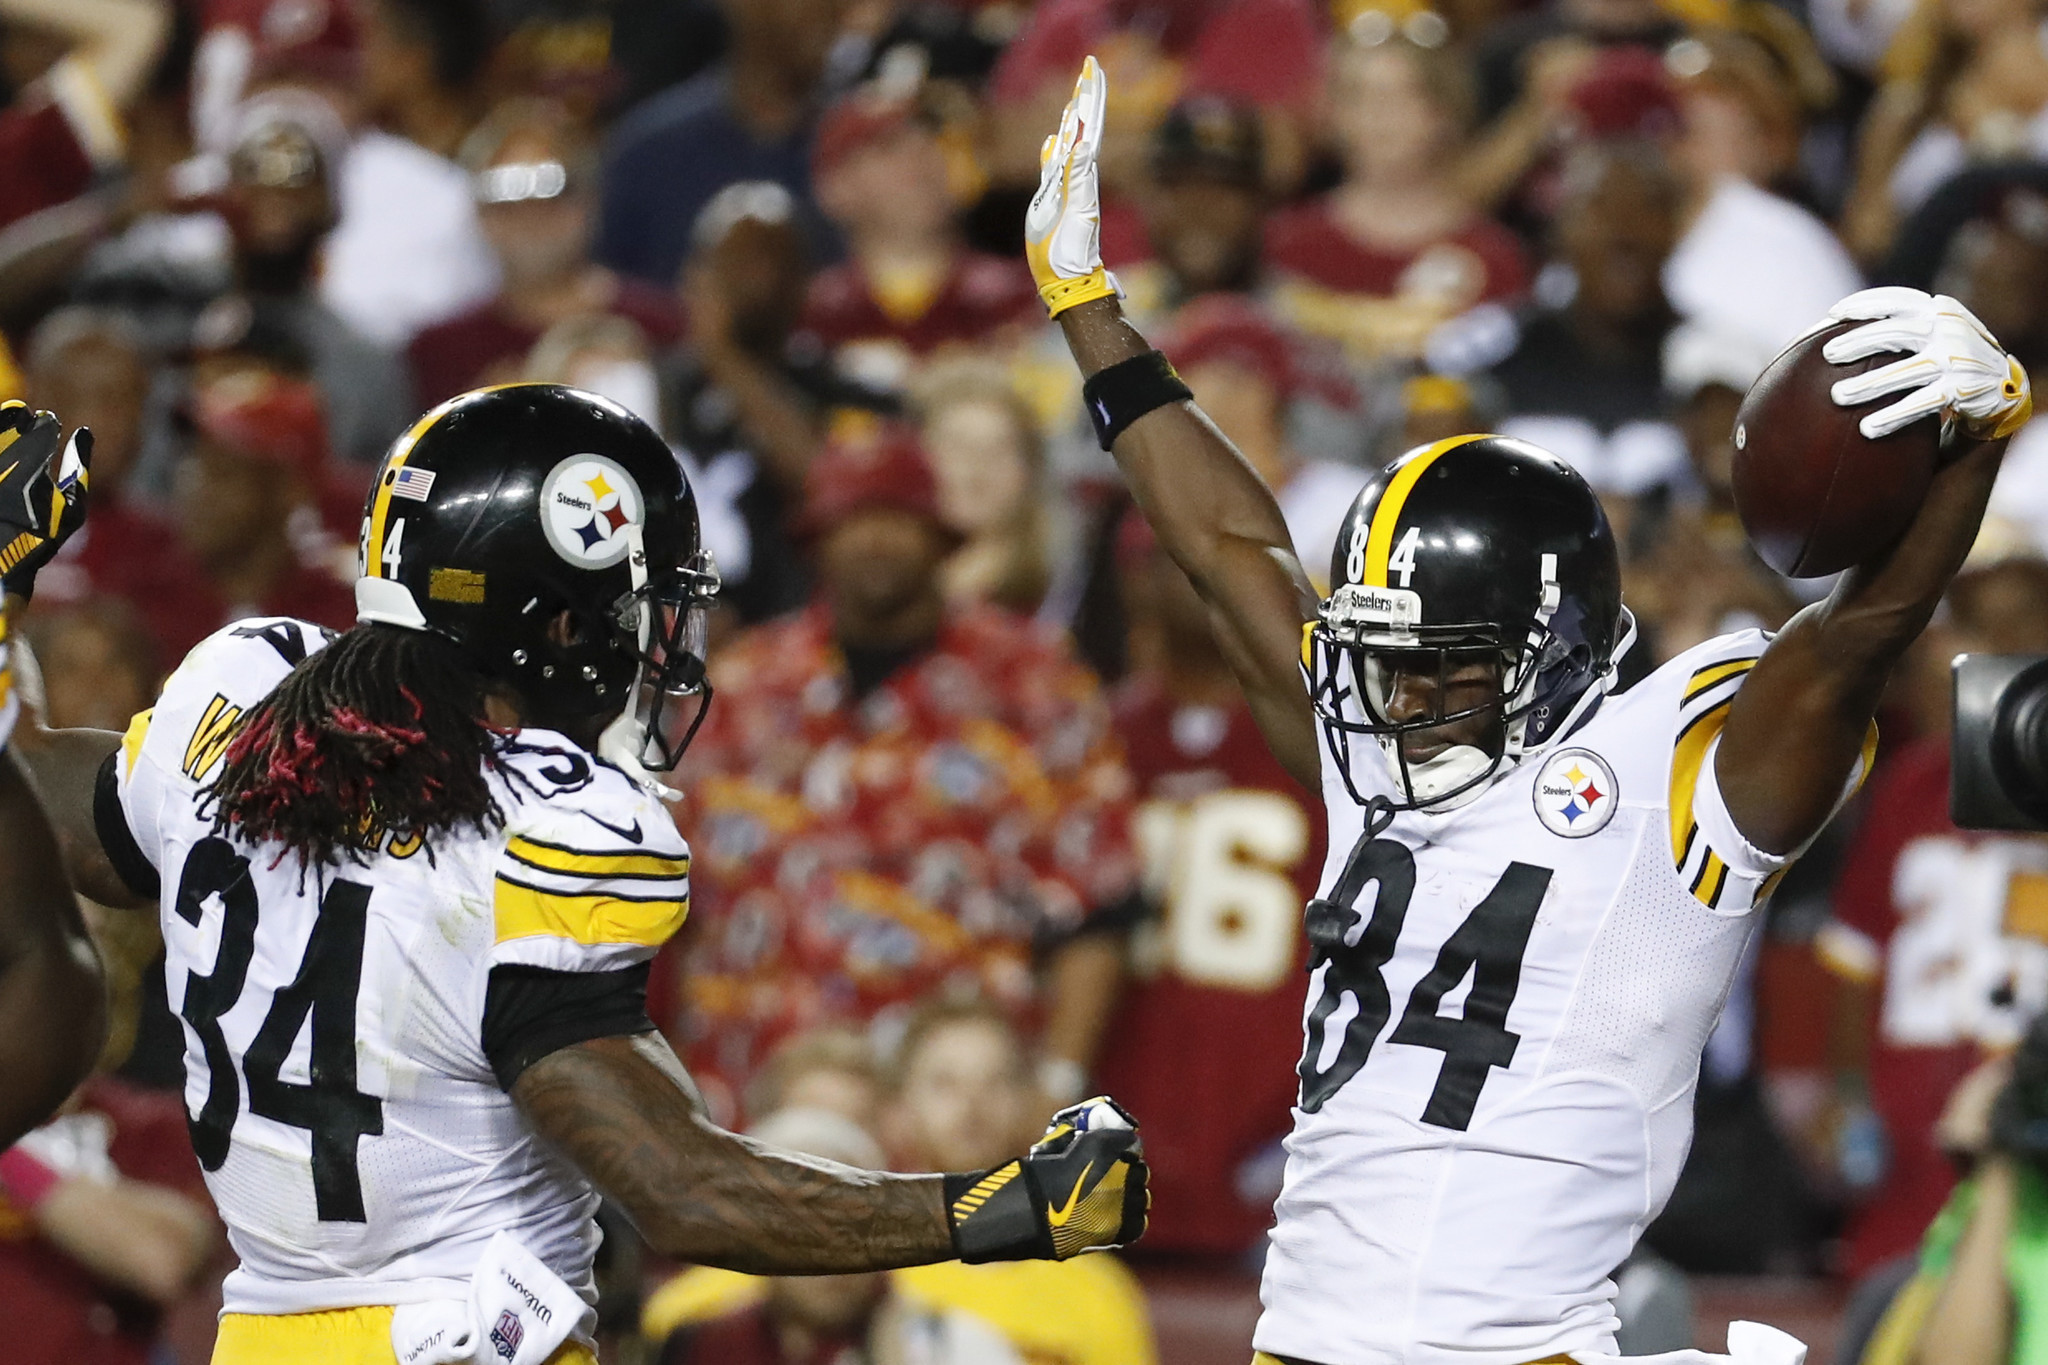 Missing weapons, Steelers still rout Redskins, 38-16